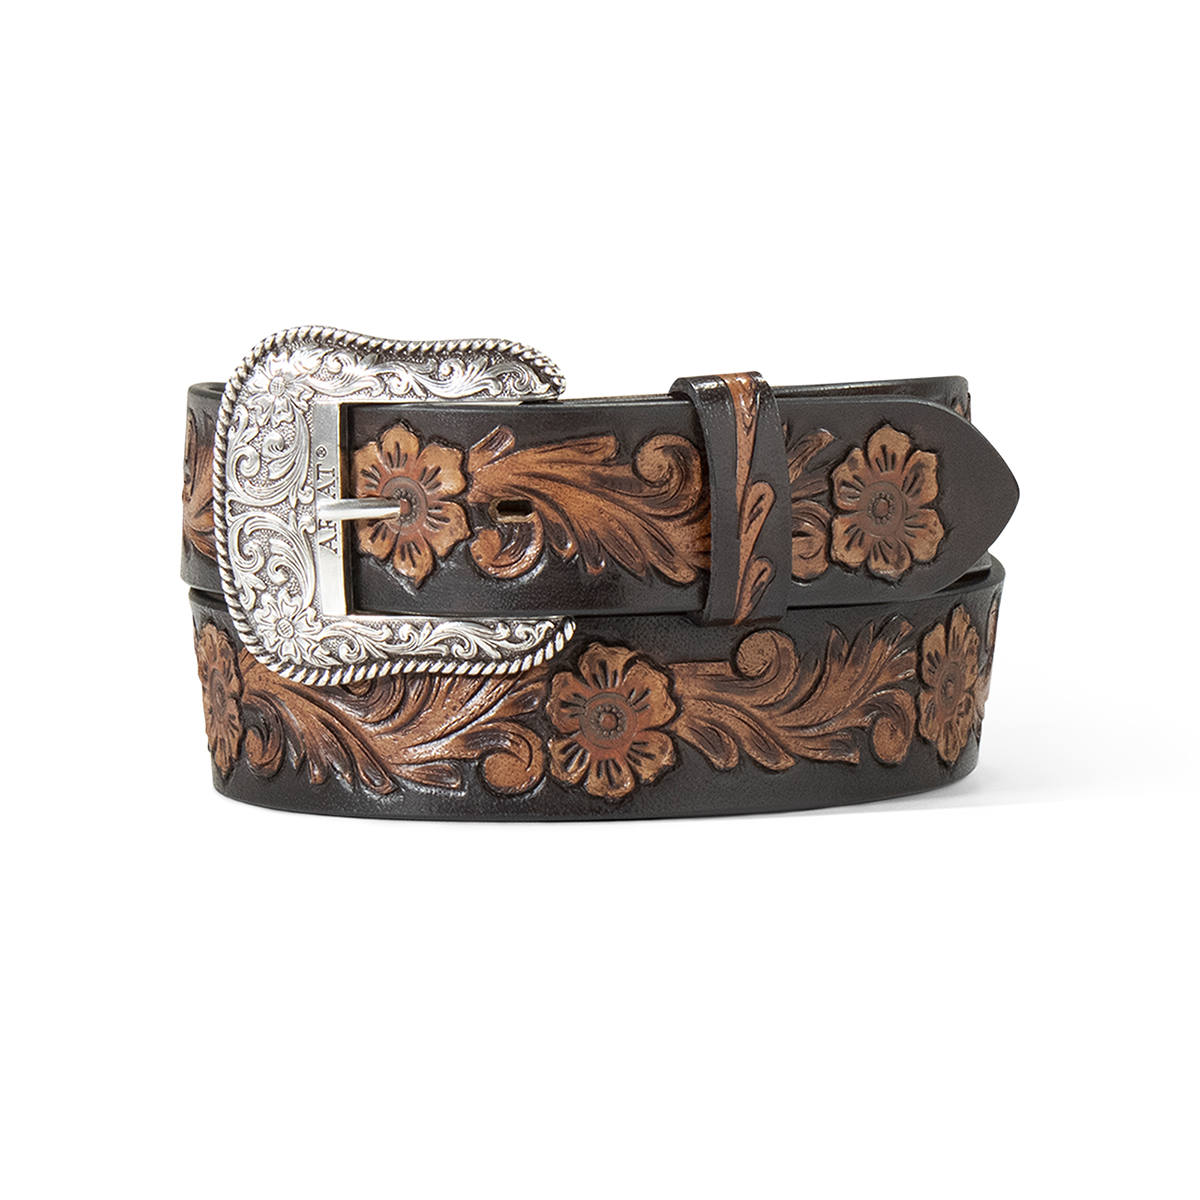 Ariat Women's Leather Hand Tooled Floral Belt - Black/Brown